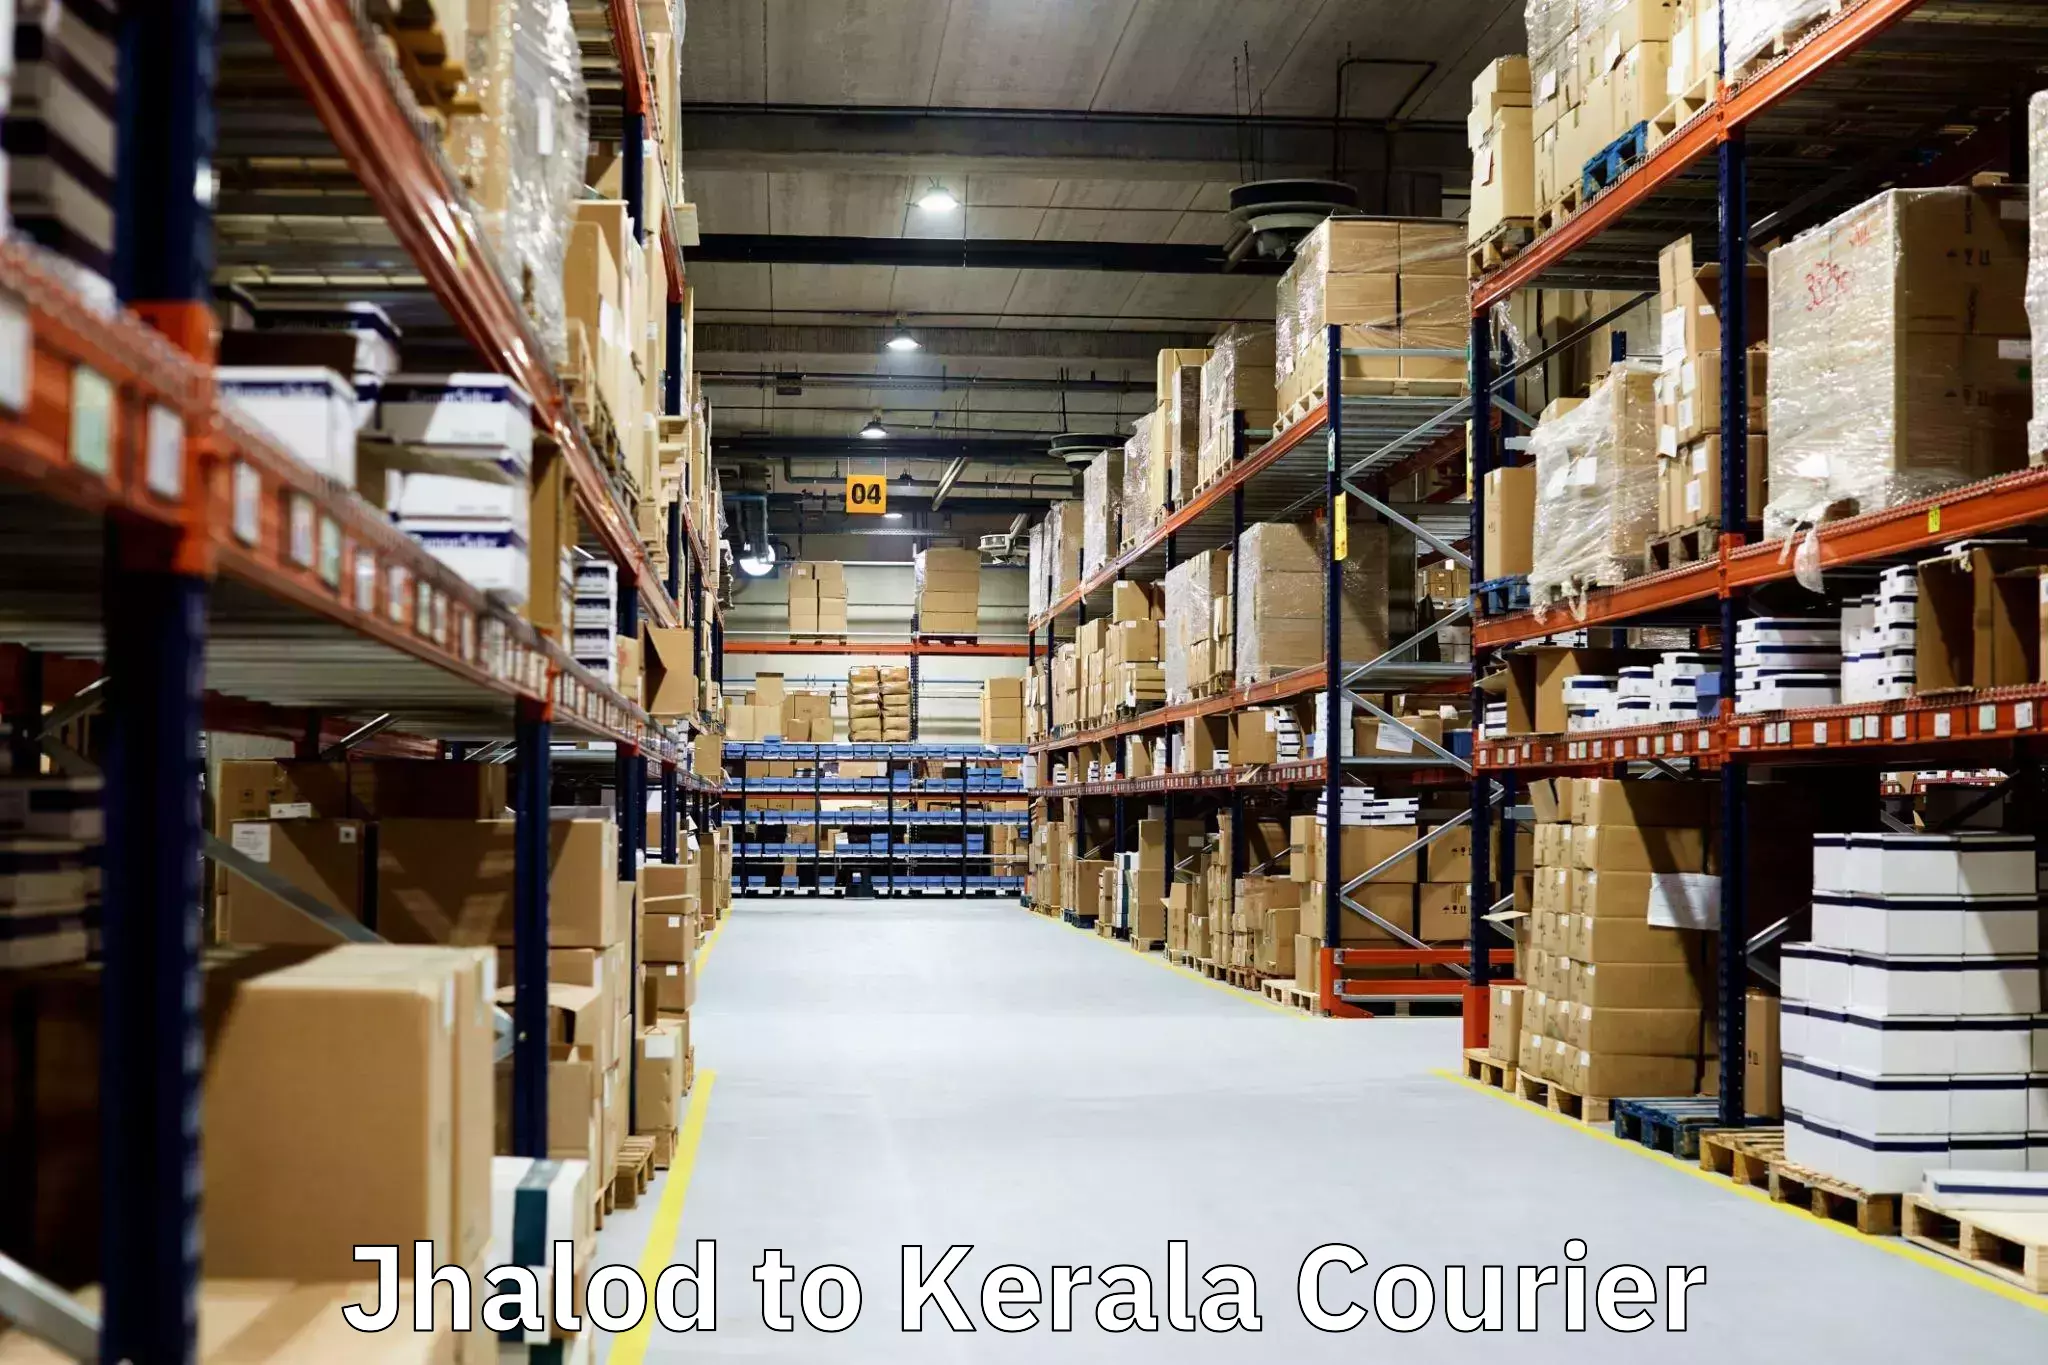 Home relocation experts Jhalod to Kerala